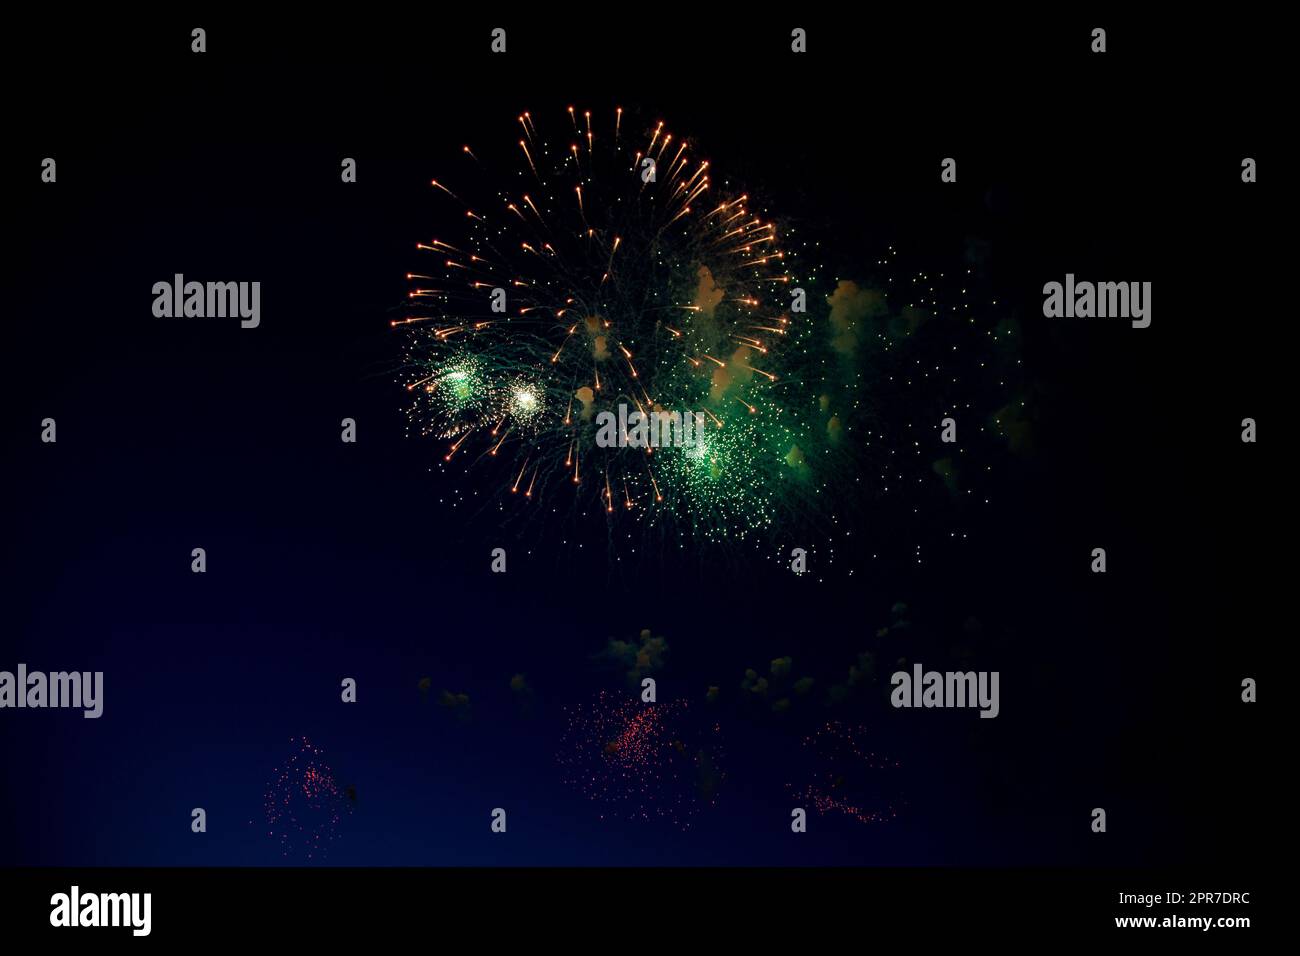 Bright orange fireworks and lots of green sparks on the background of the night sky Stock Photo